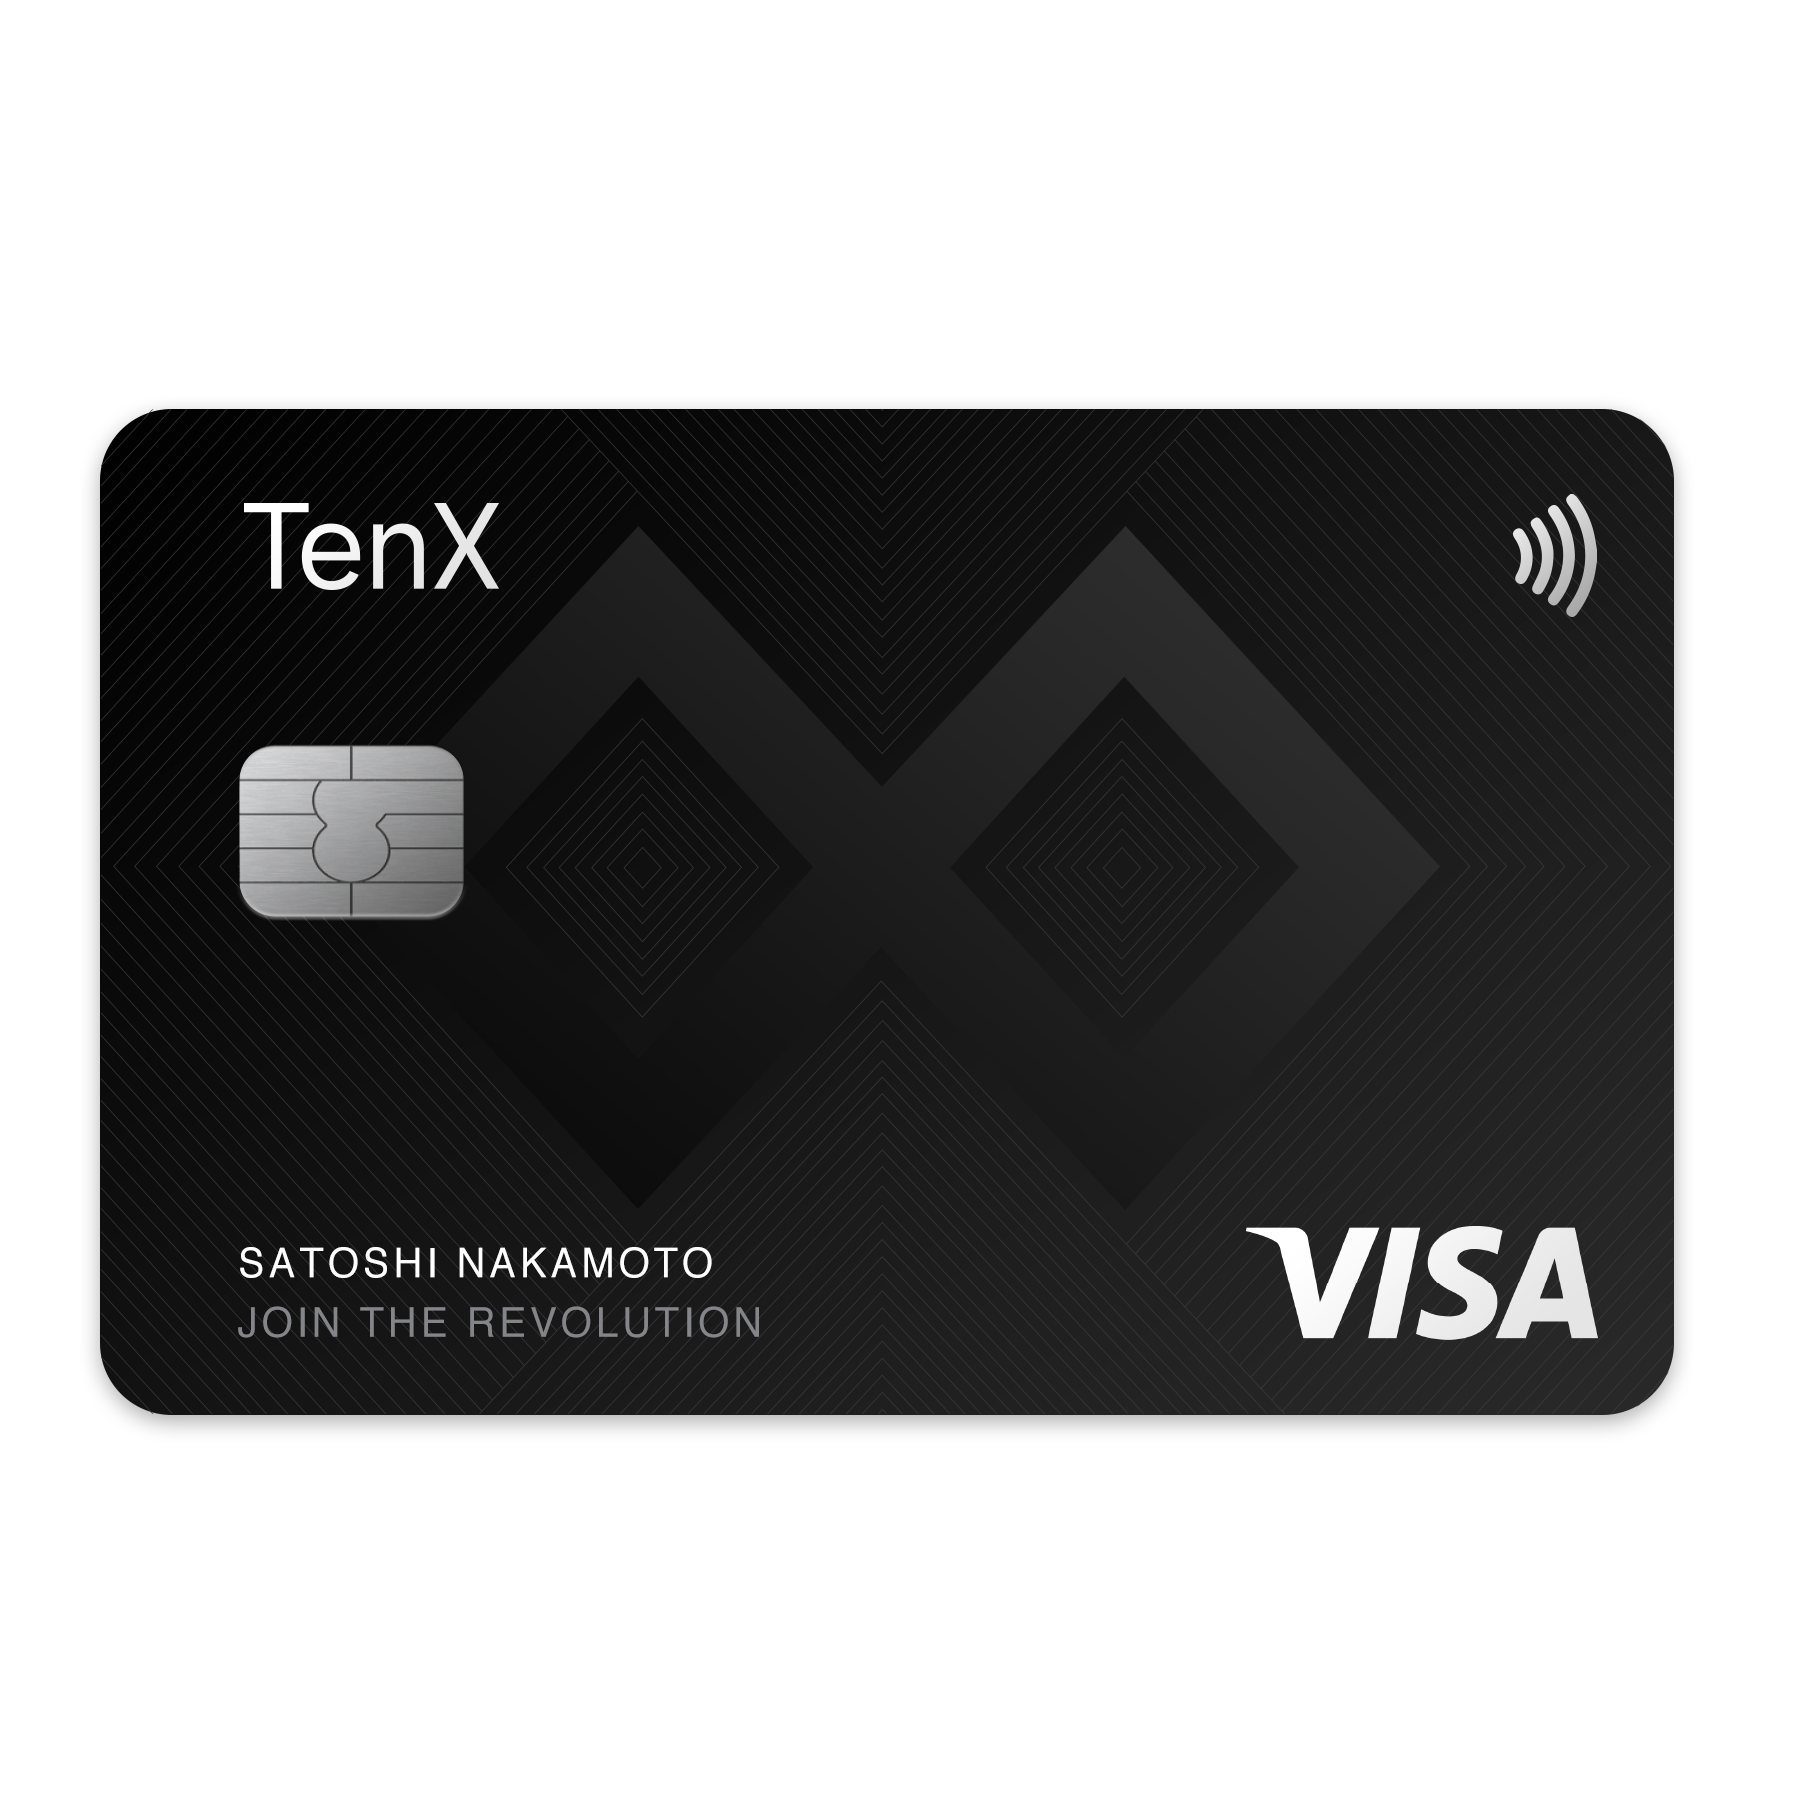 Use of Tokencard/Tenx/WirexCard - CGT?